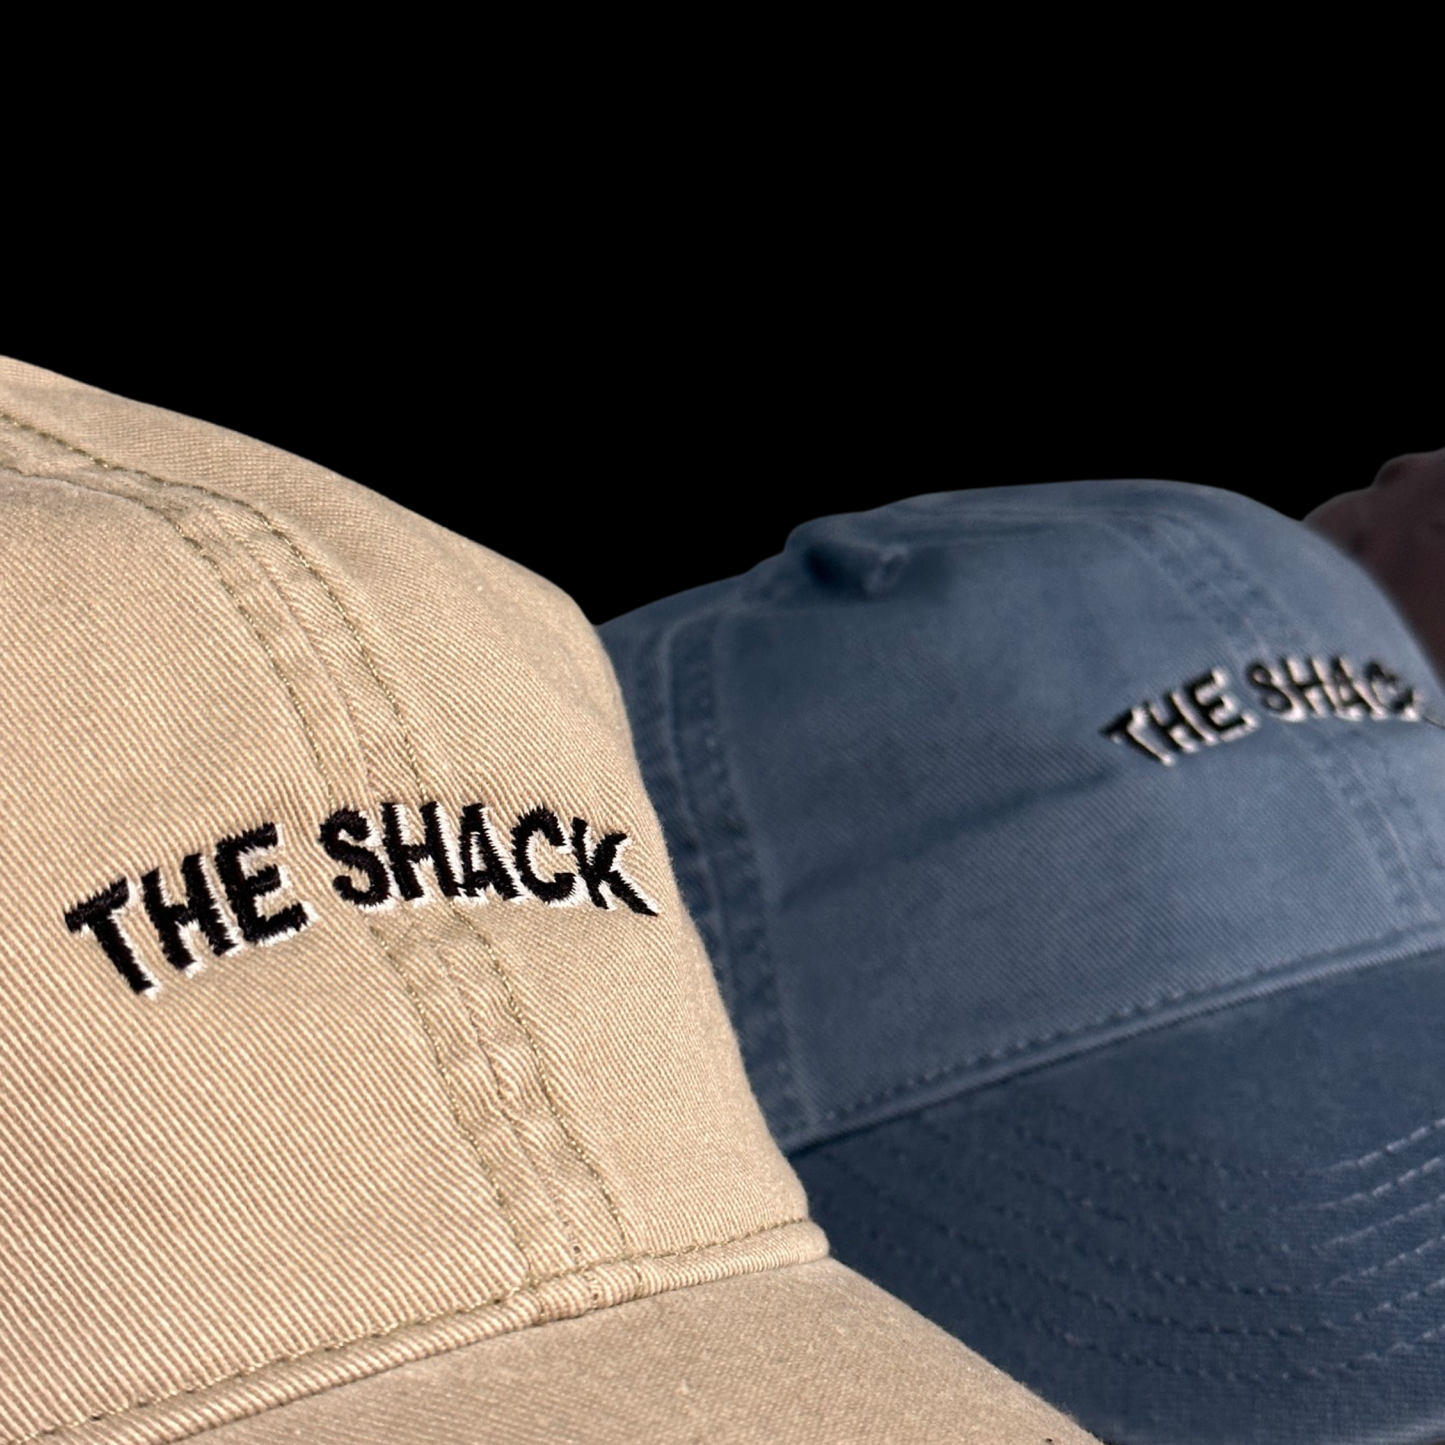 The Shack Bold Hat